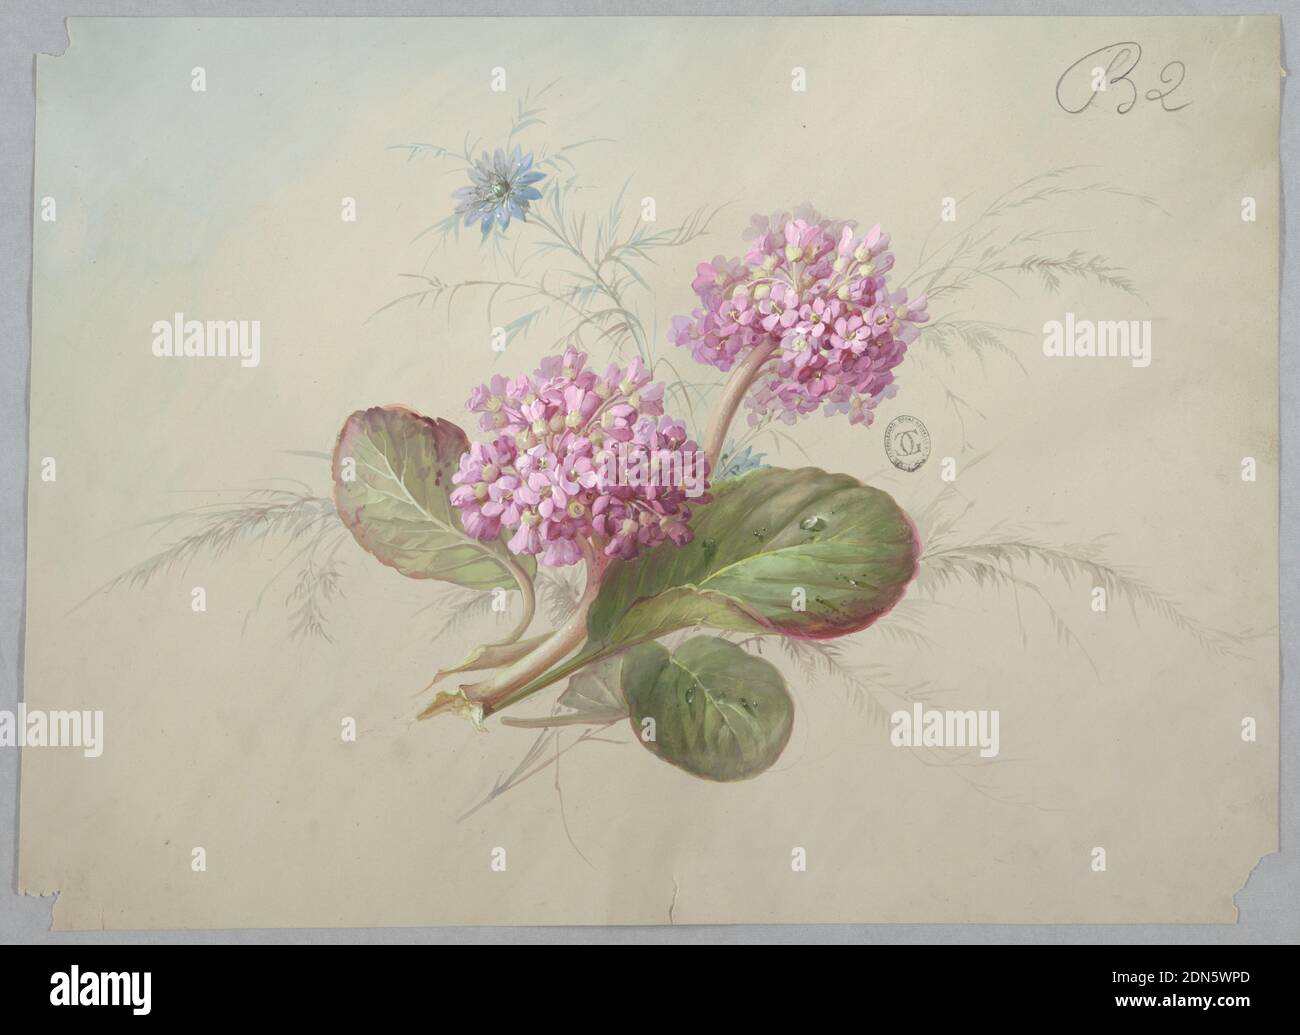 Design for Wallpaper and Textile: Flowers, Brush and gouache on cream paper, Two clusters of purple flowers with three leaves and a blue flower emerging from center on light gray ground., France, 19th century, wallpaper designs, Drawing Stock Photo